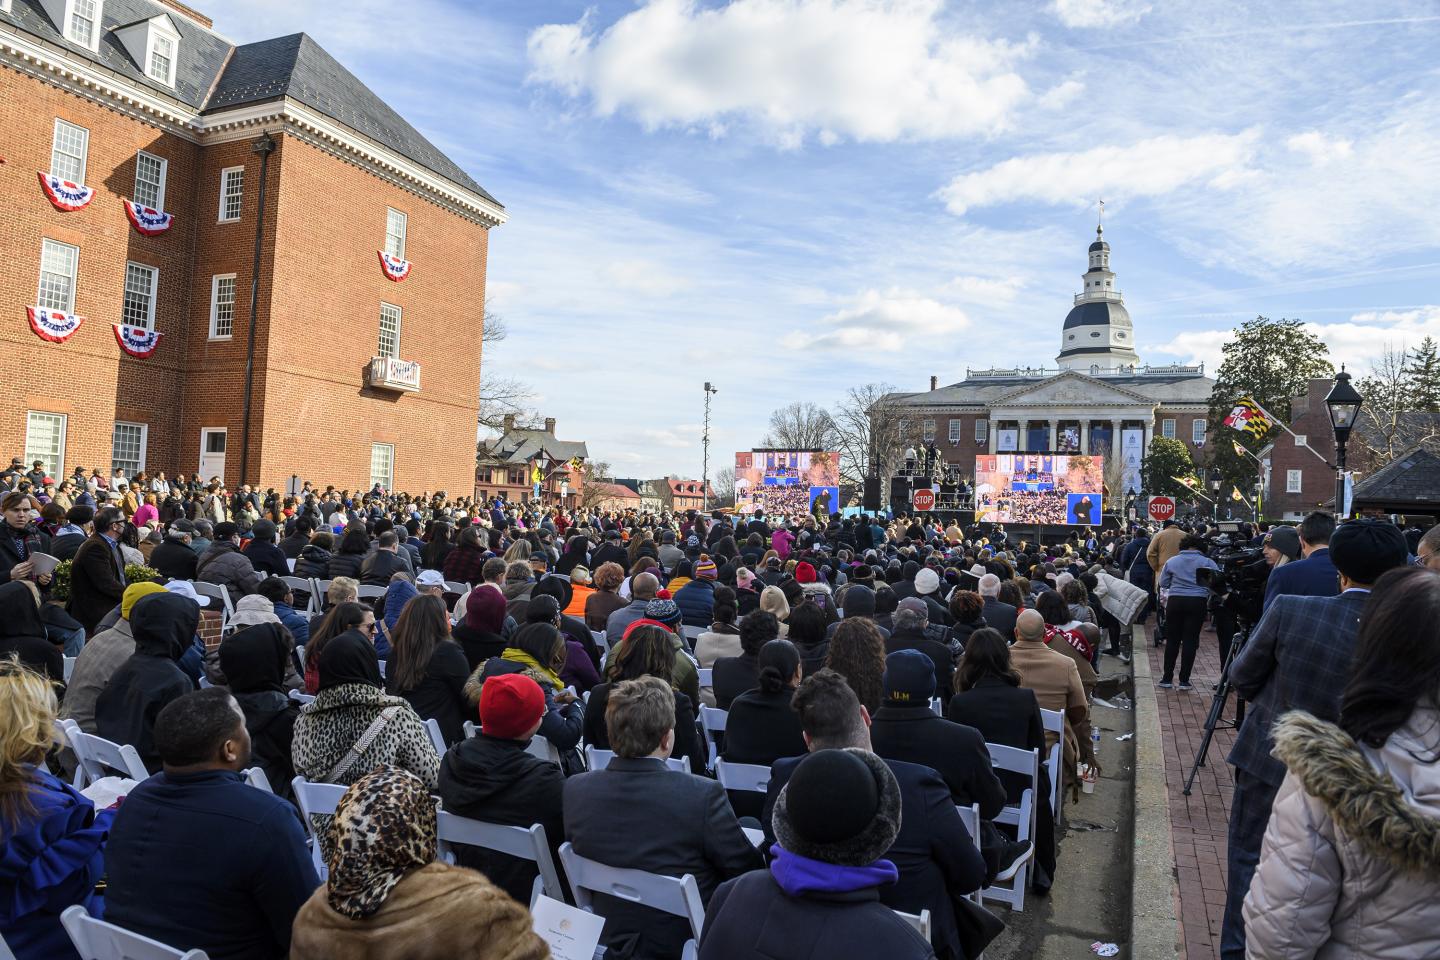 A large crowd gathers outdoors under blue skies in Annapolis for the inauguration of Governor Wes Moore